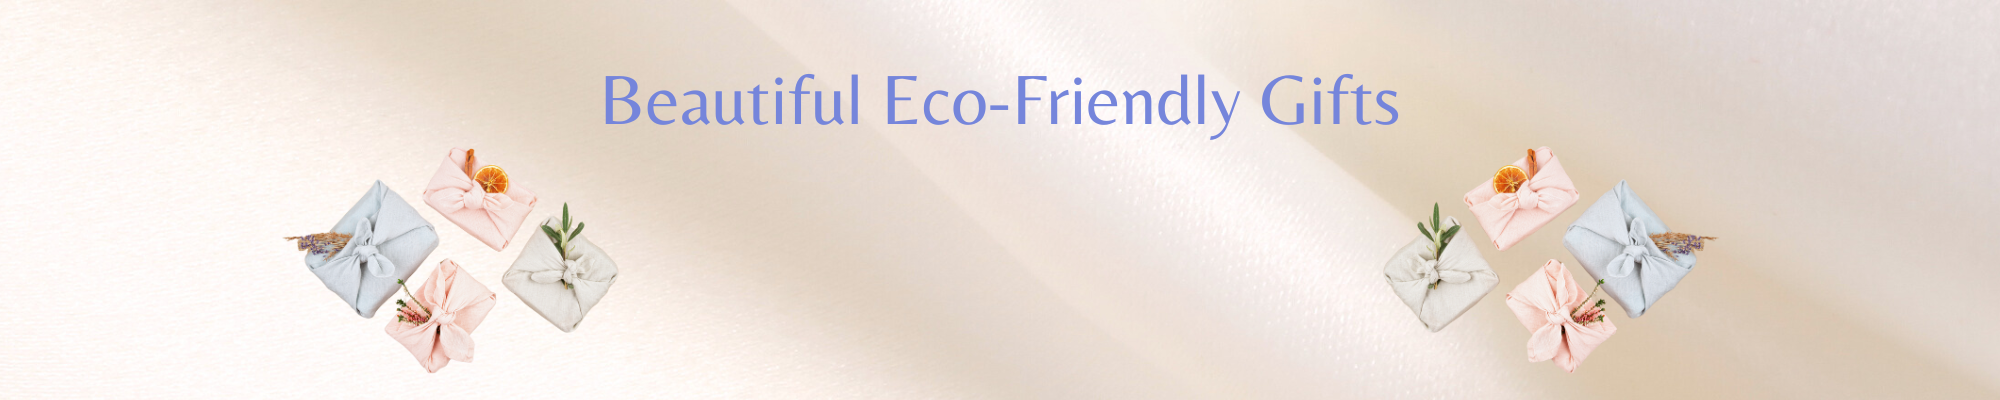 Twizzle Designs is an eco-friendly gifts store and a proud Australian business. Quality, sustainable, Australian made Eco Home gifts for eco aware friends. An Earth friendly business making it easy to find the best Australian eco-gifts.